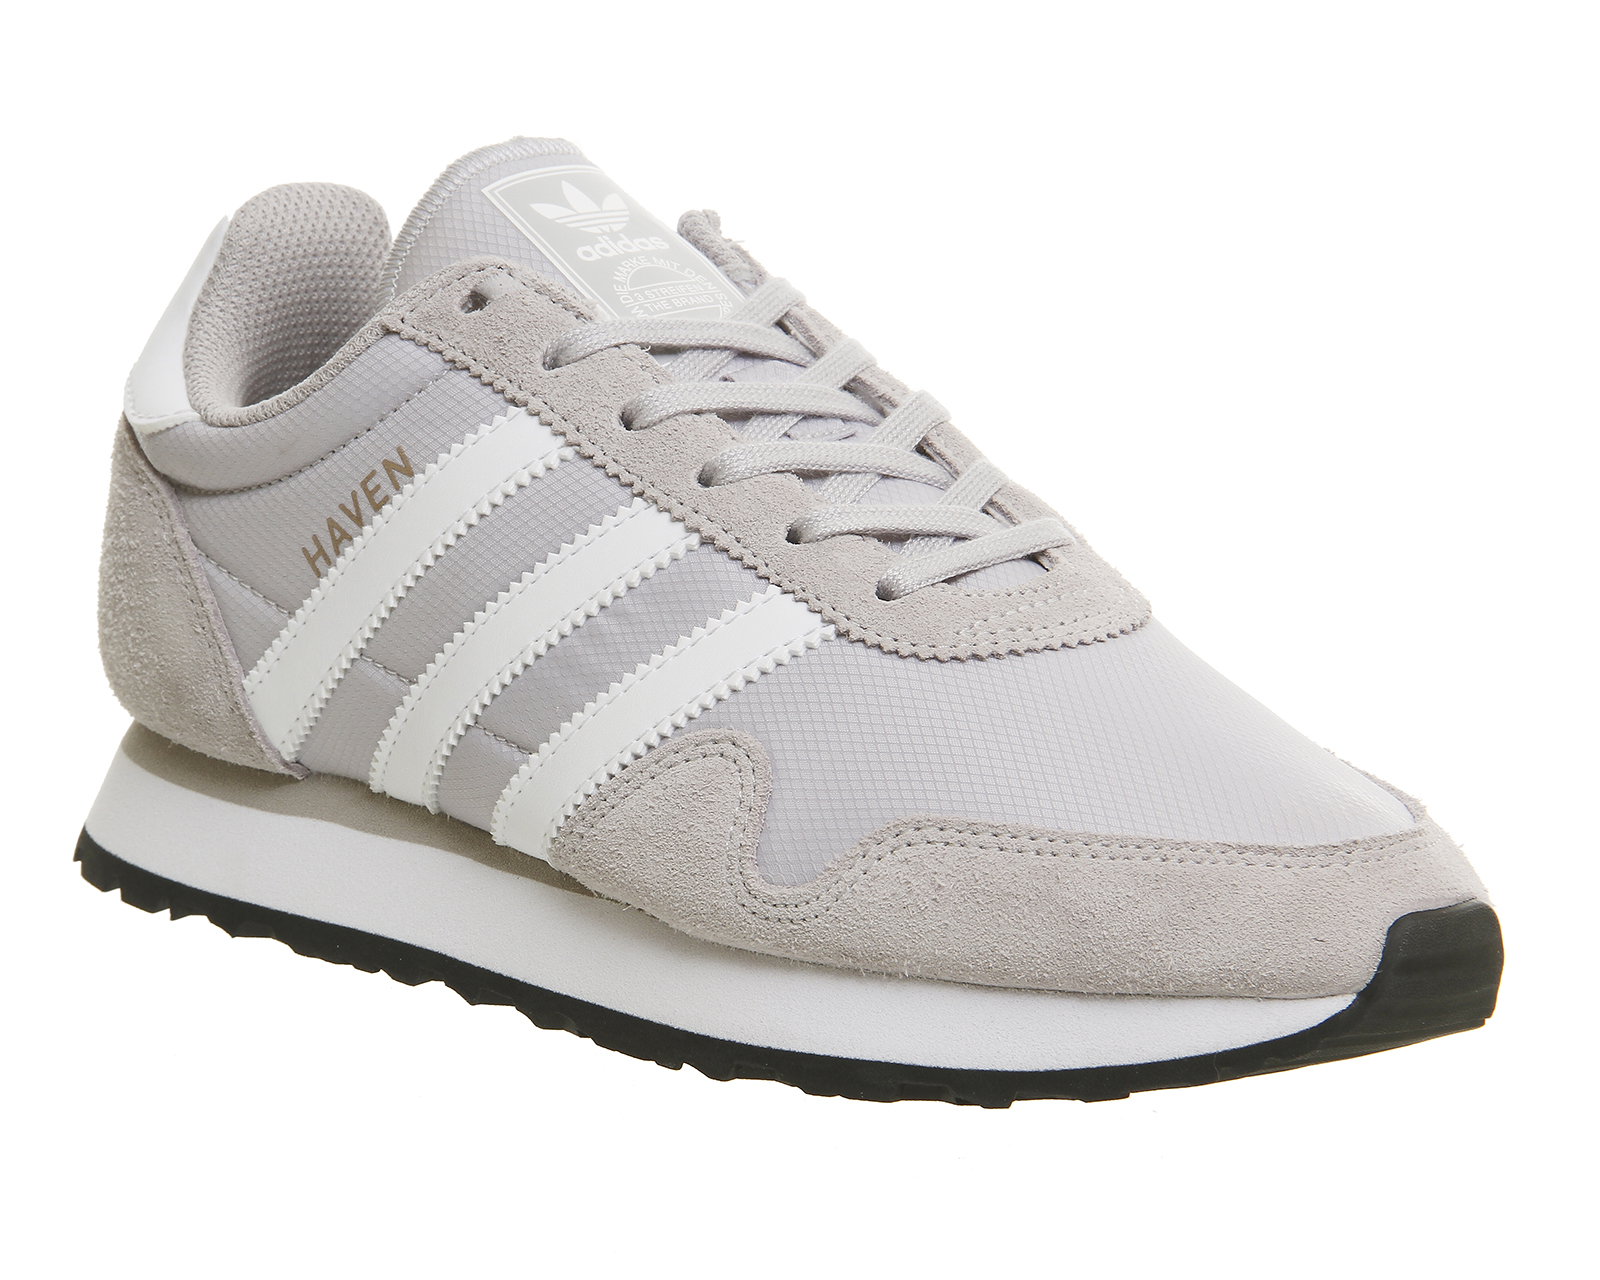 adidas Haven Lgh Solid Grey White 